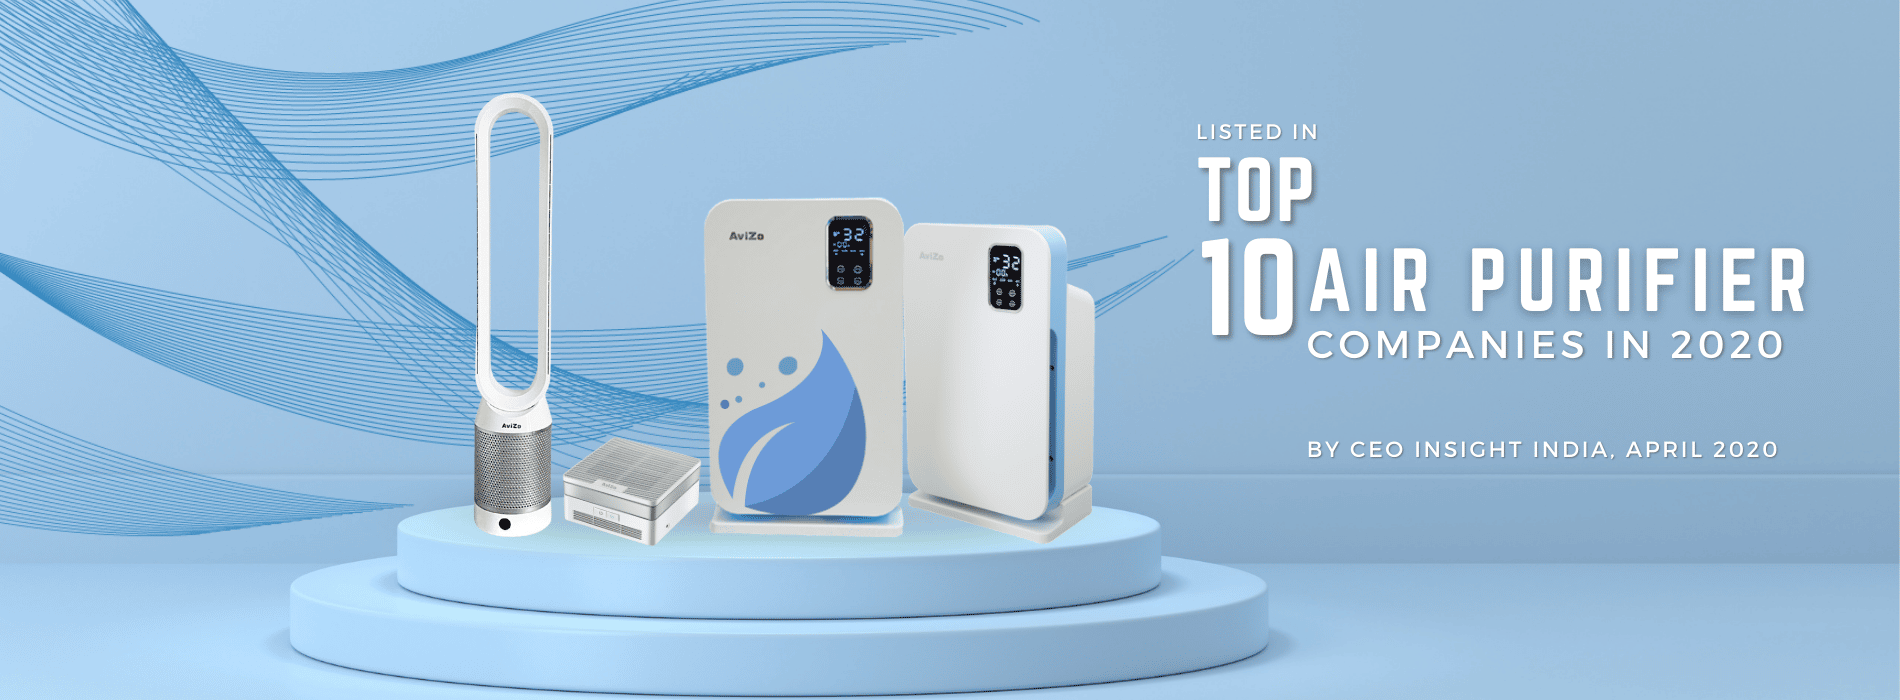 Avizo - listed in top 10 air purifier companies